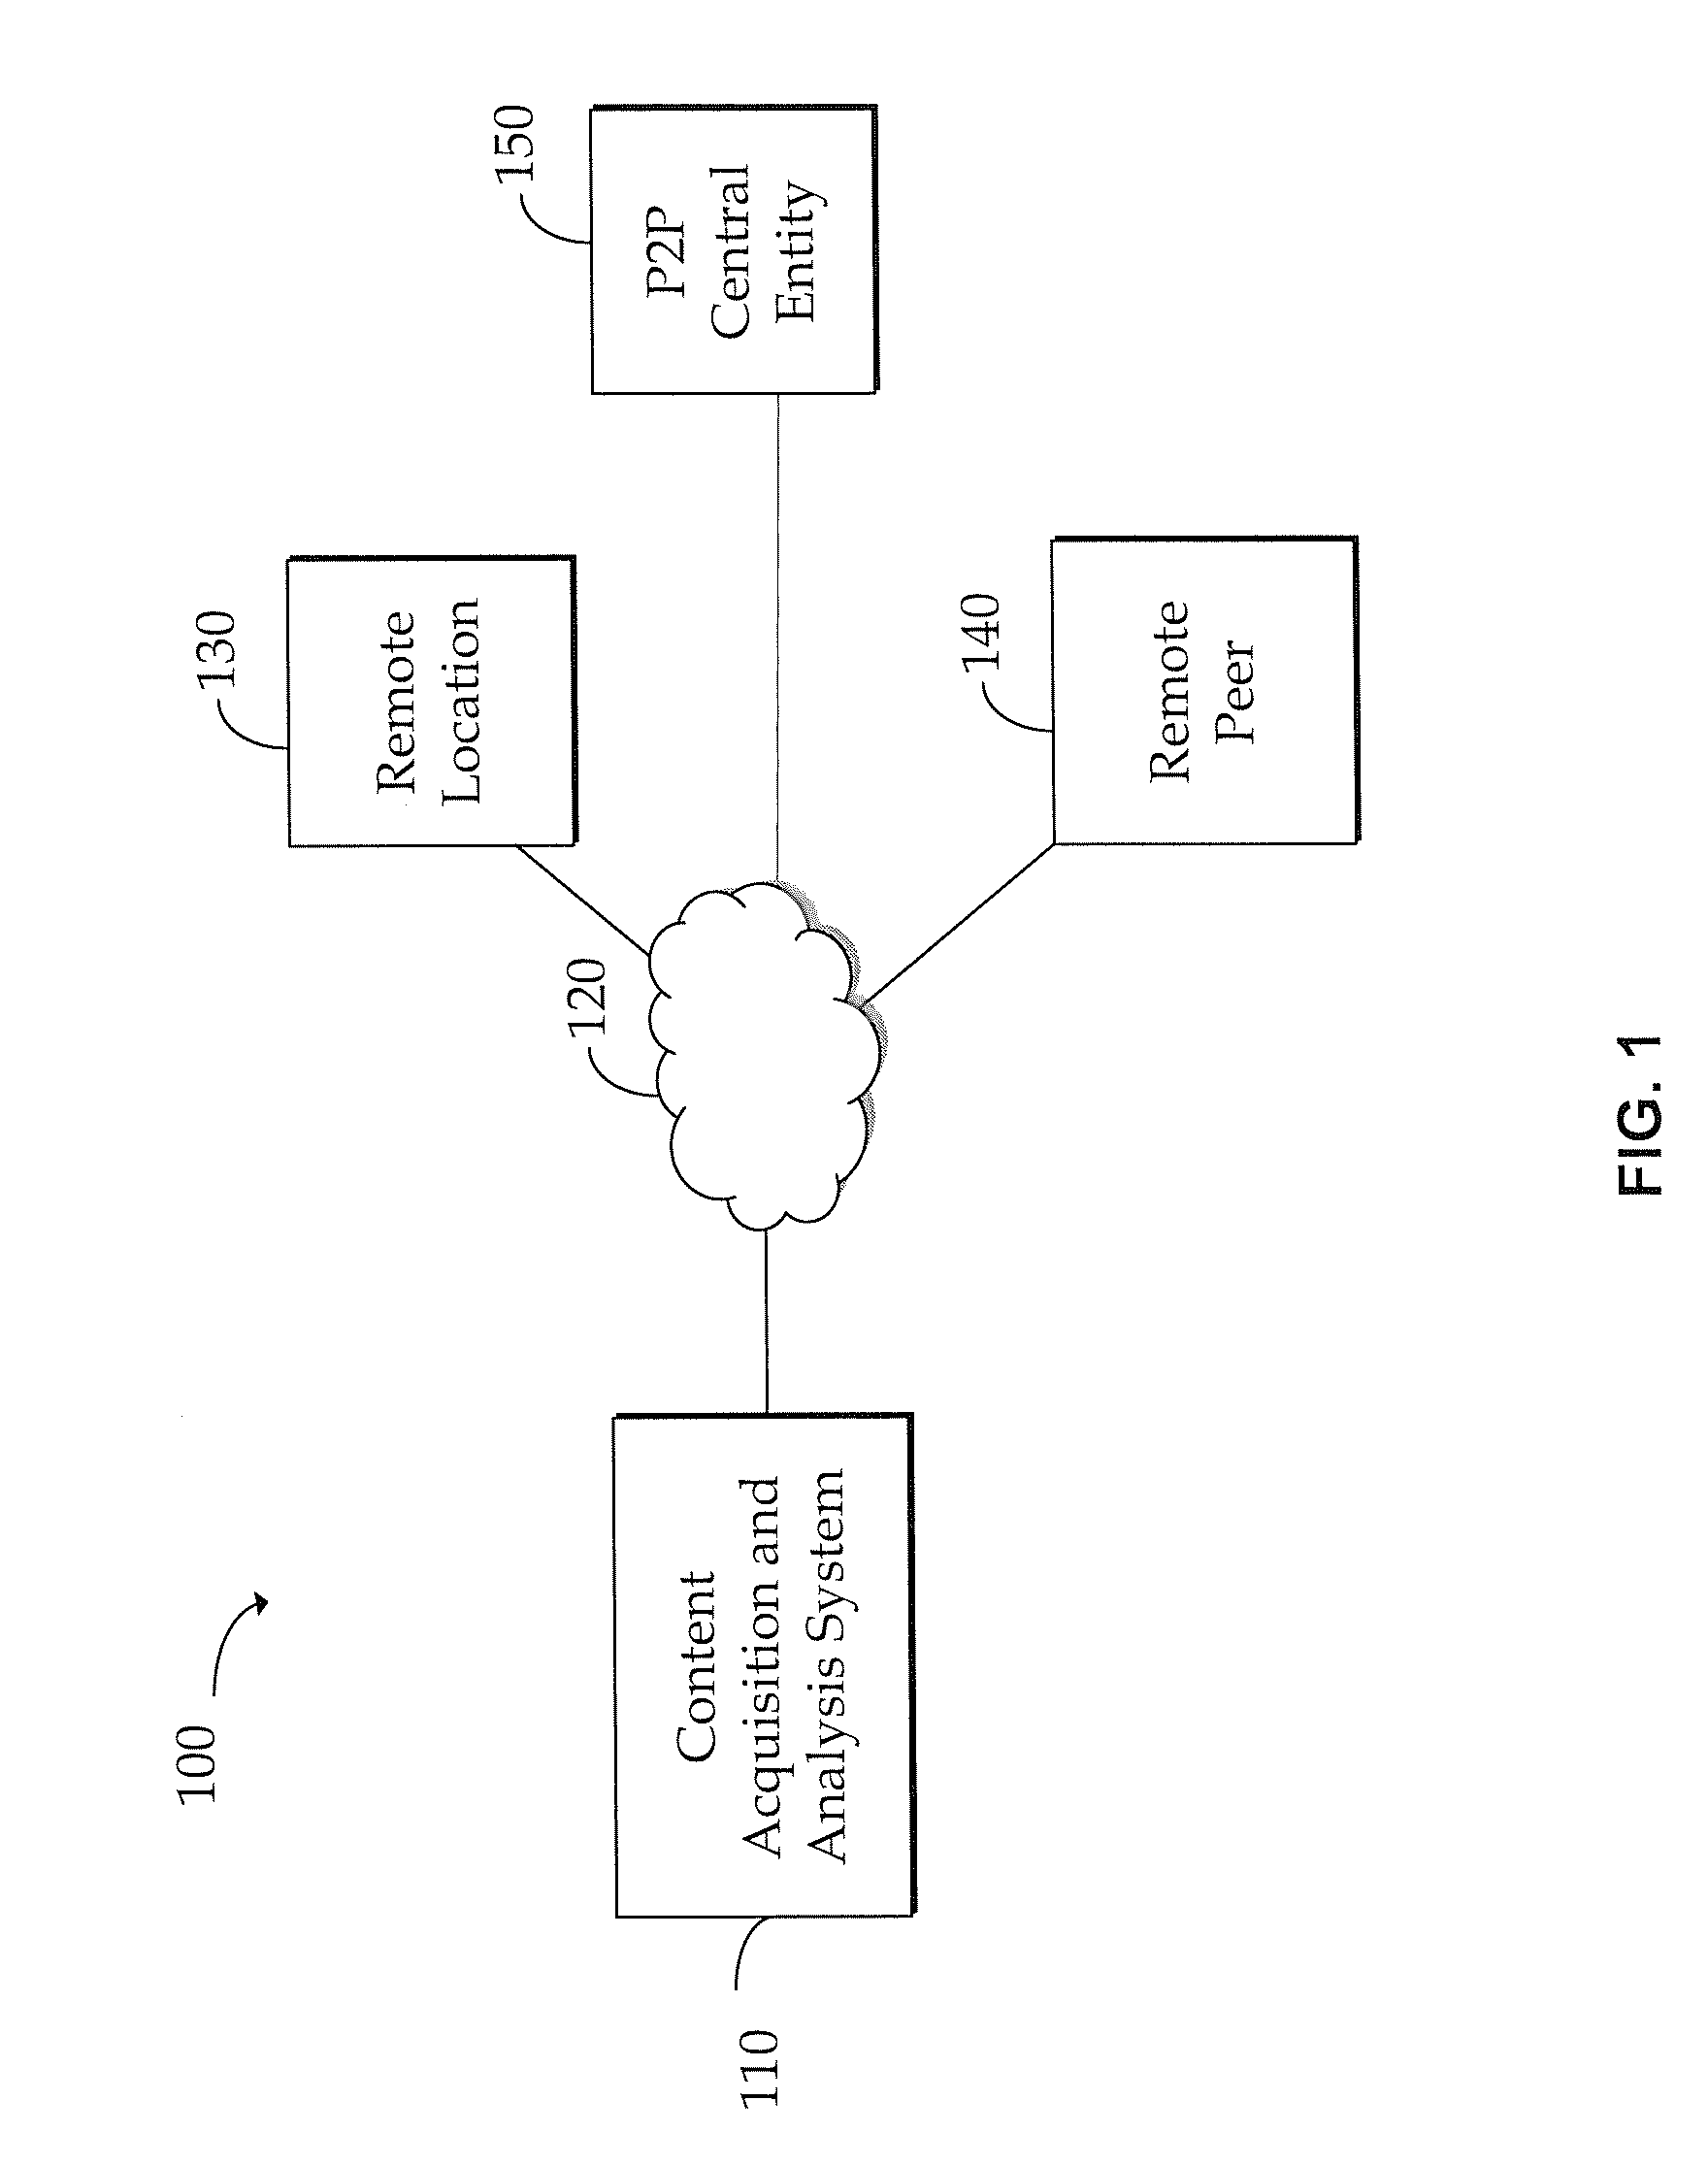 Apparatus and method for generating a database that maps metadata to p2p content